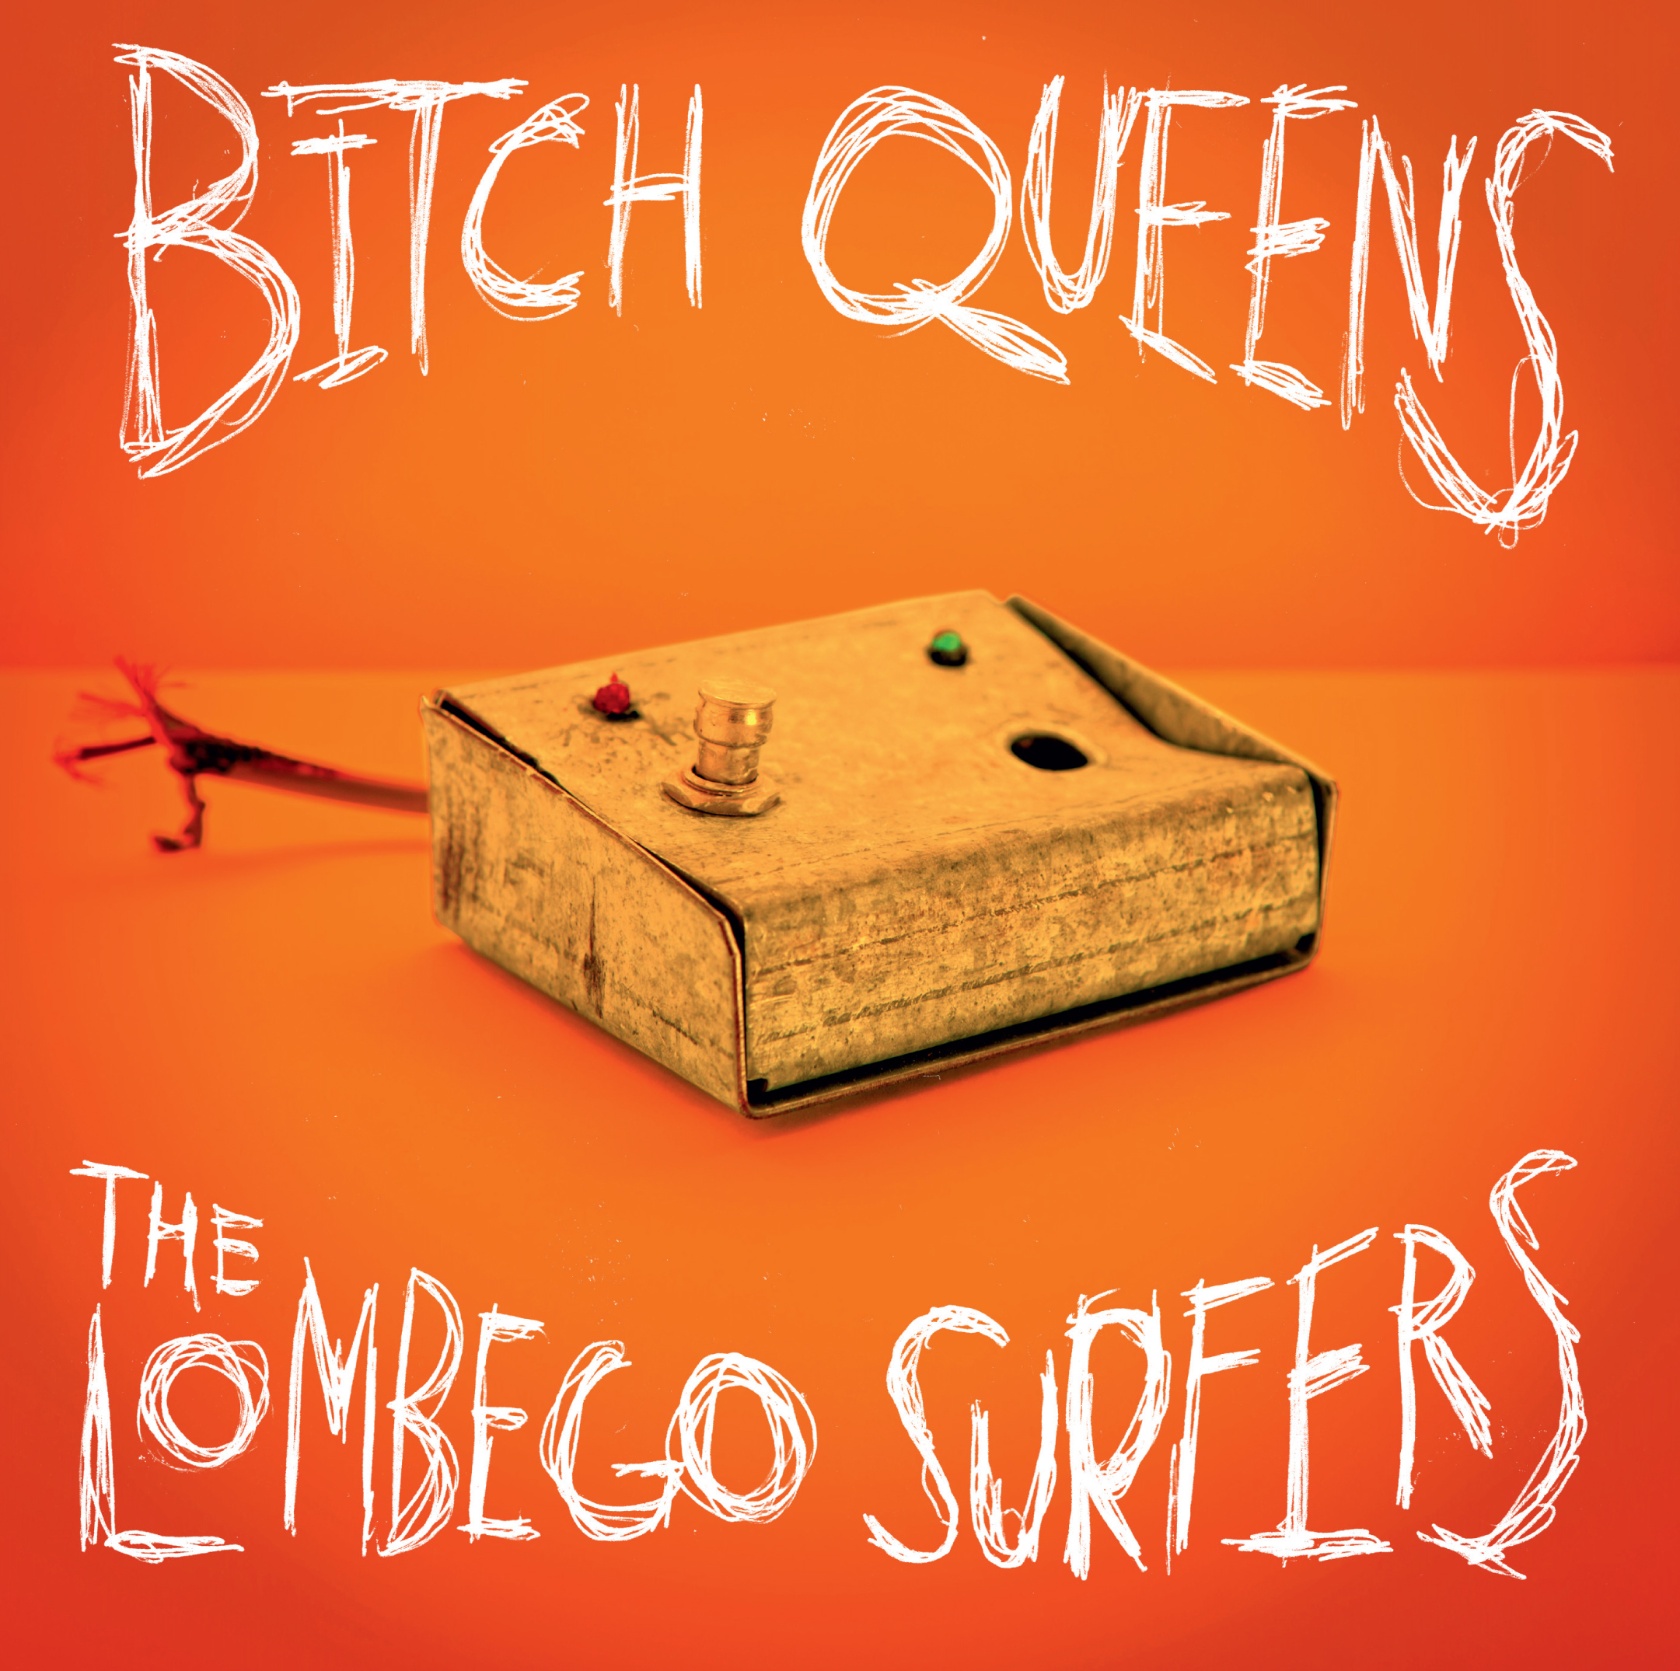 Bitch Queens – Split-Single feat. The Lombego Surfers (Cover)